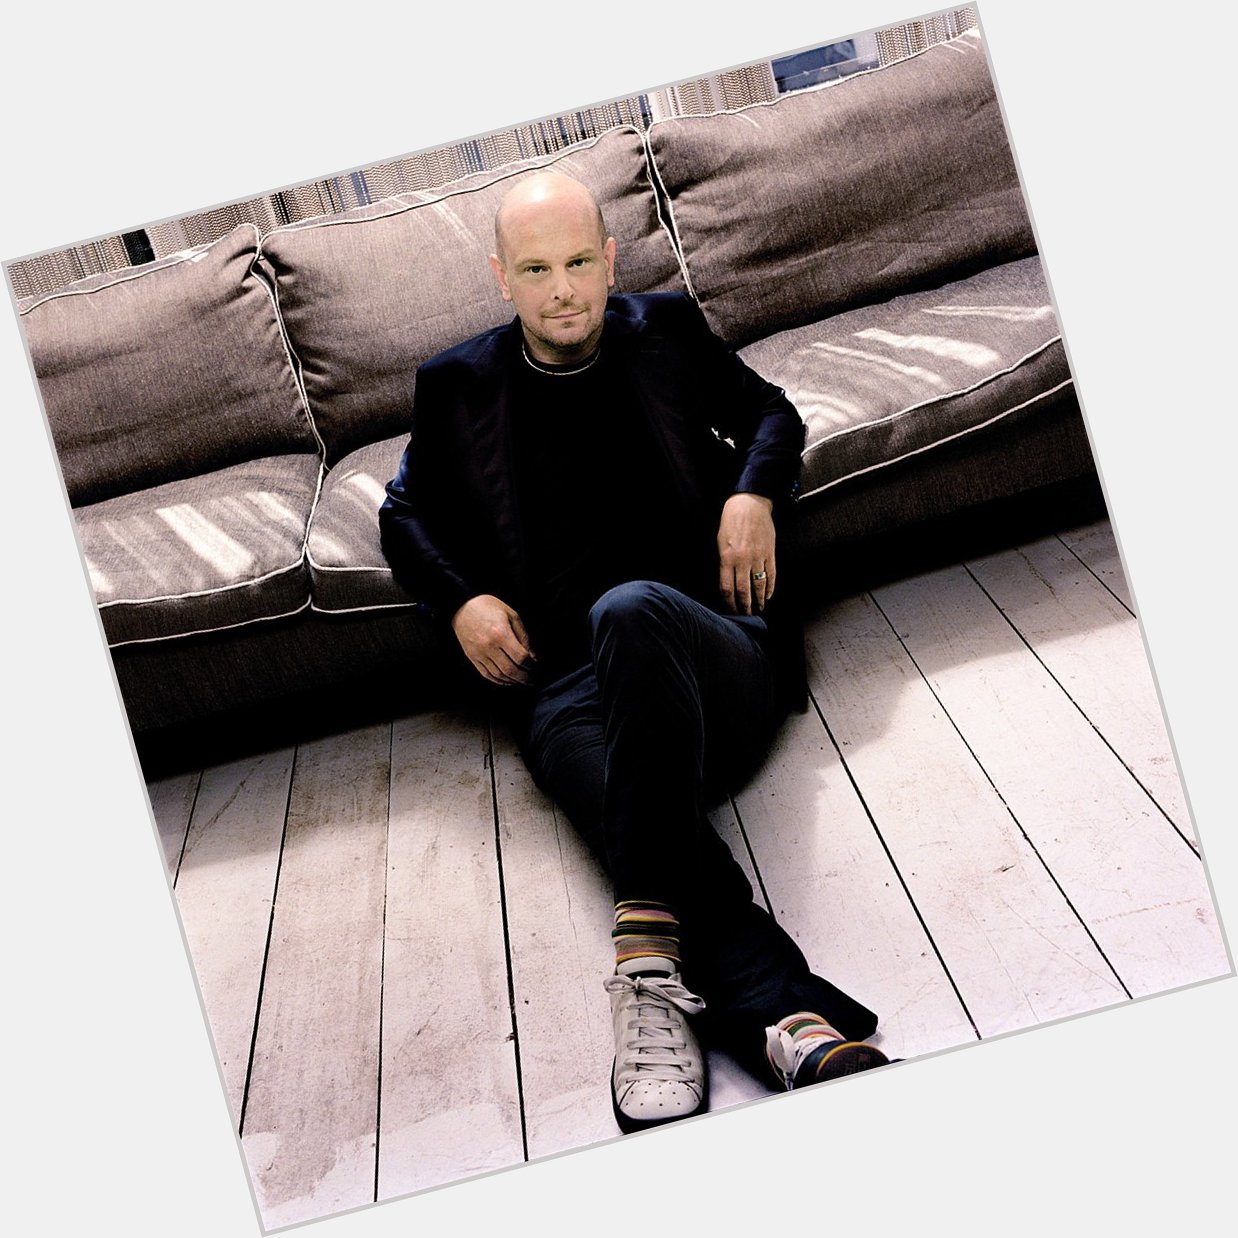 Happy 50th birthday to Phil Selway of Radiohead!  